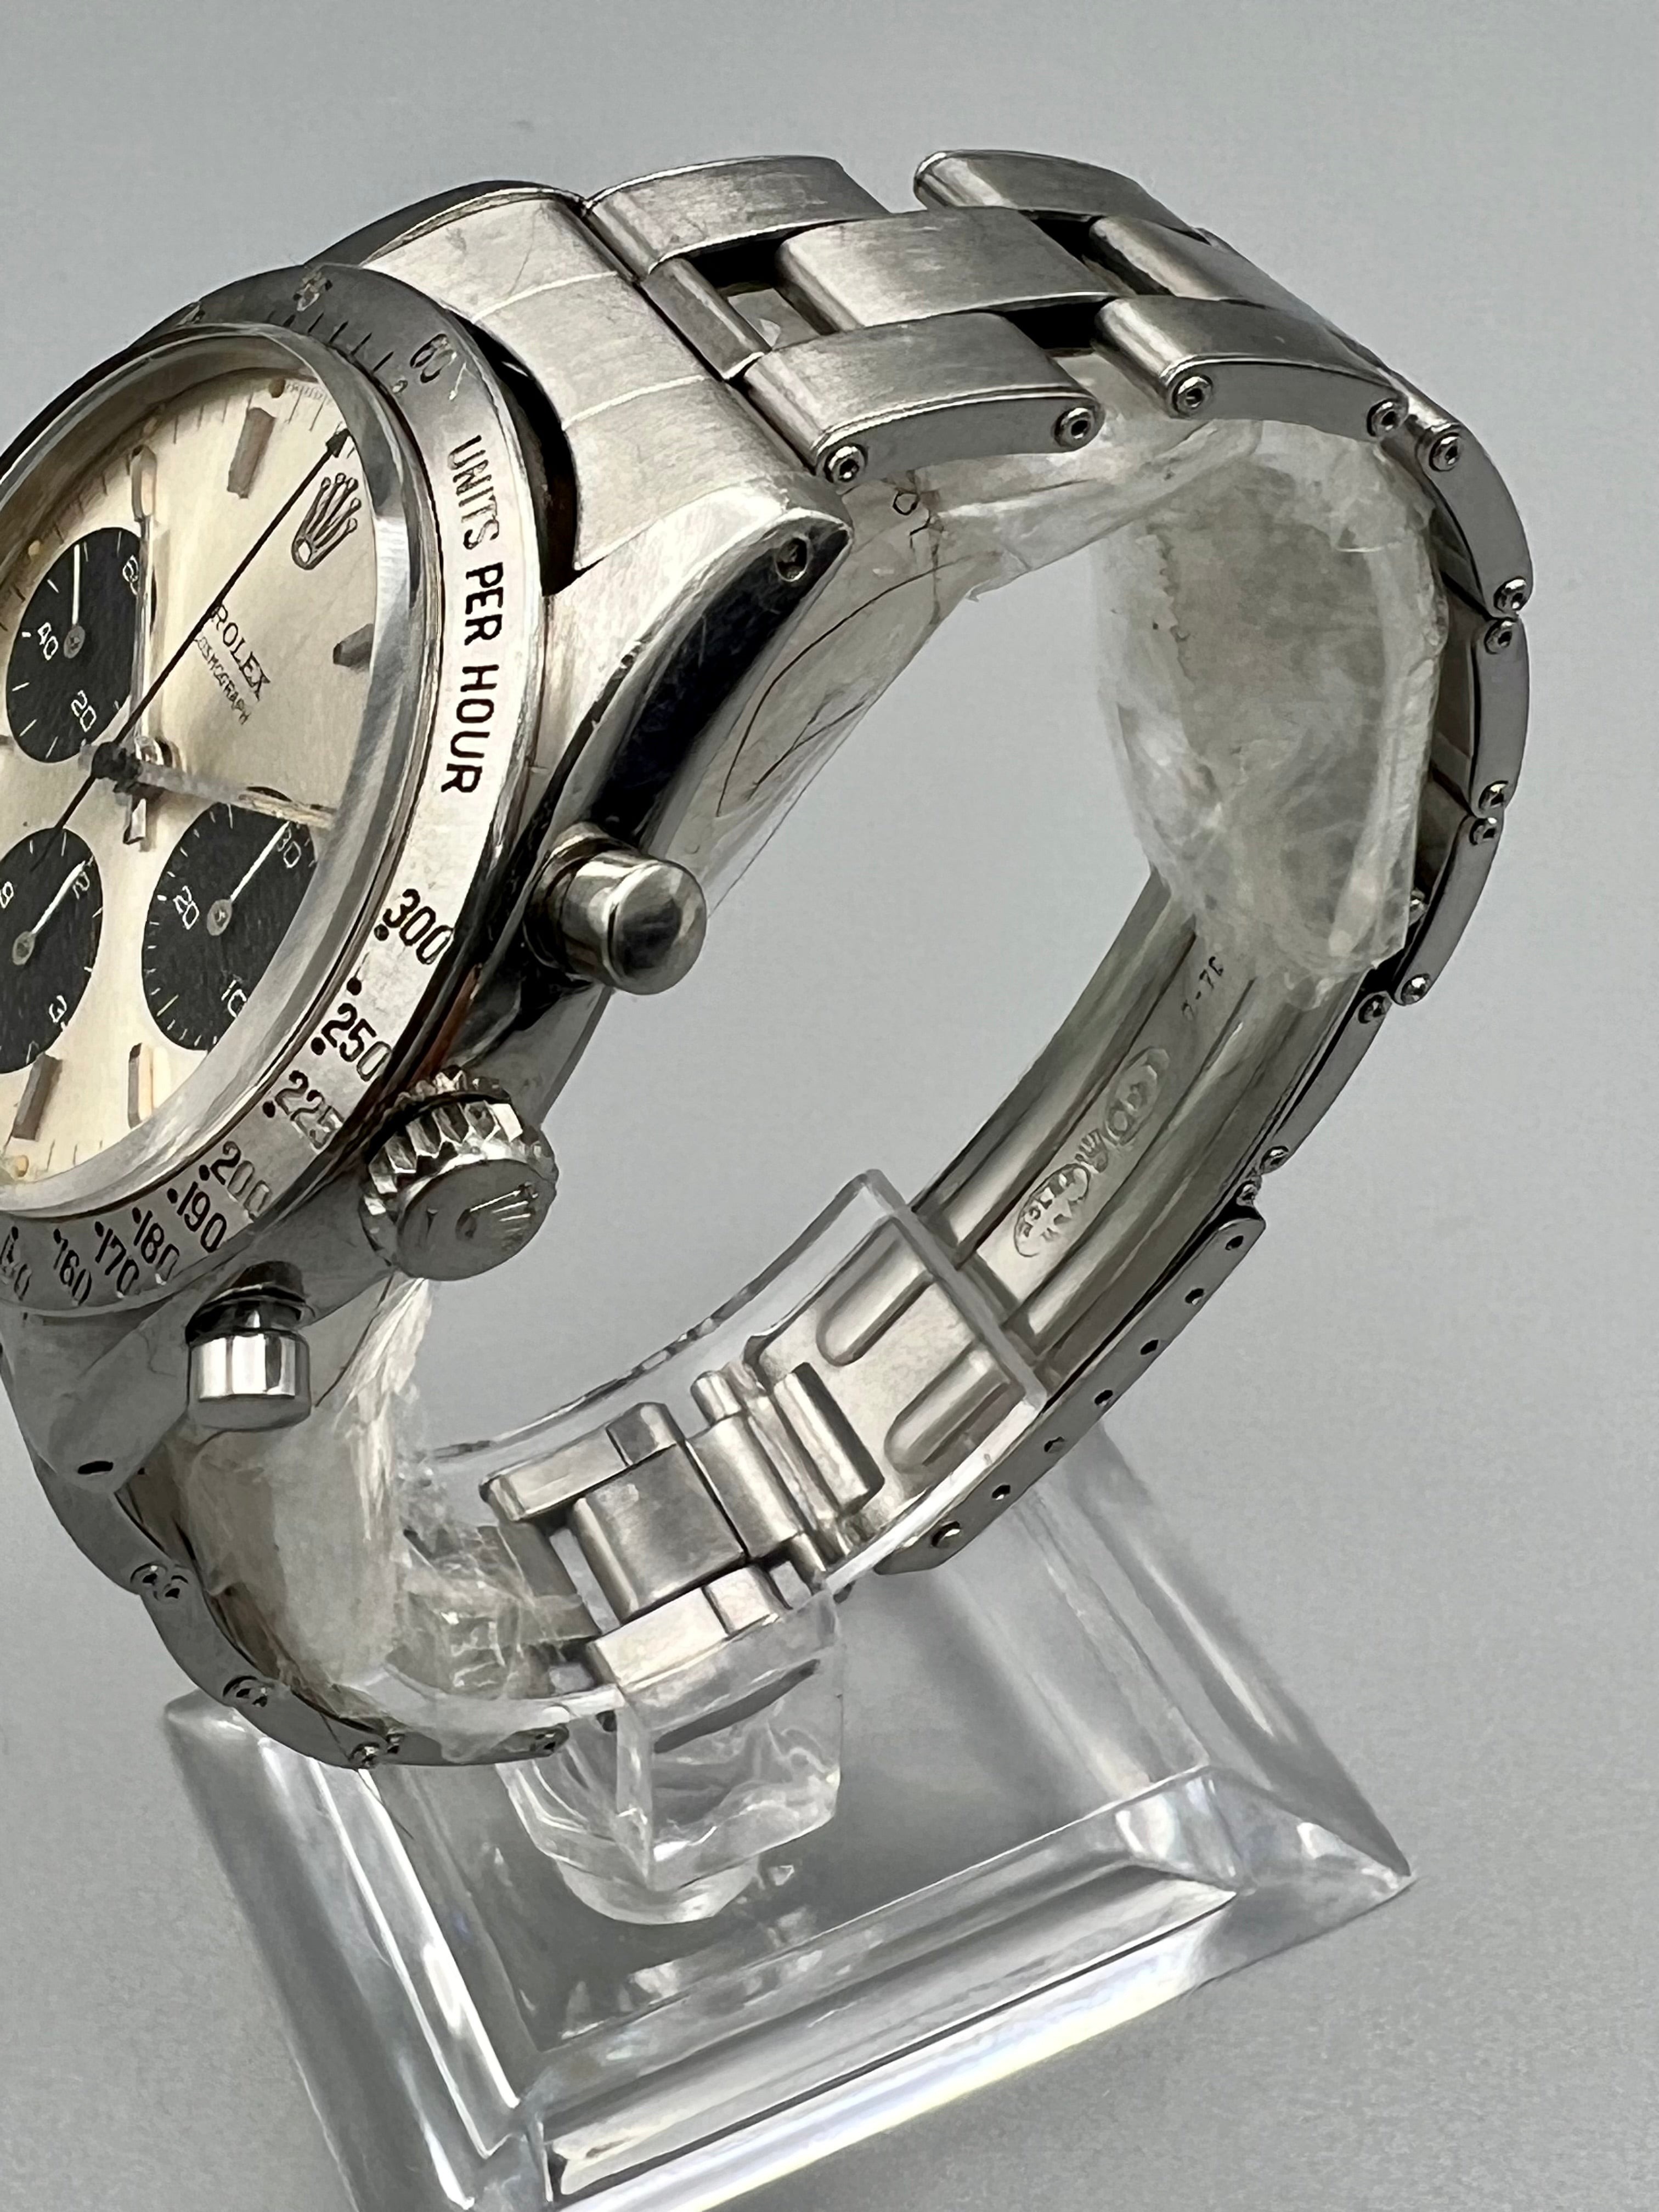 Rolex Ref 6239 First Series Cosmograph Daytona, Silver Dial, All Original,  Warranty Papers and Box, 1964